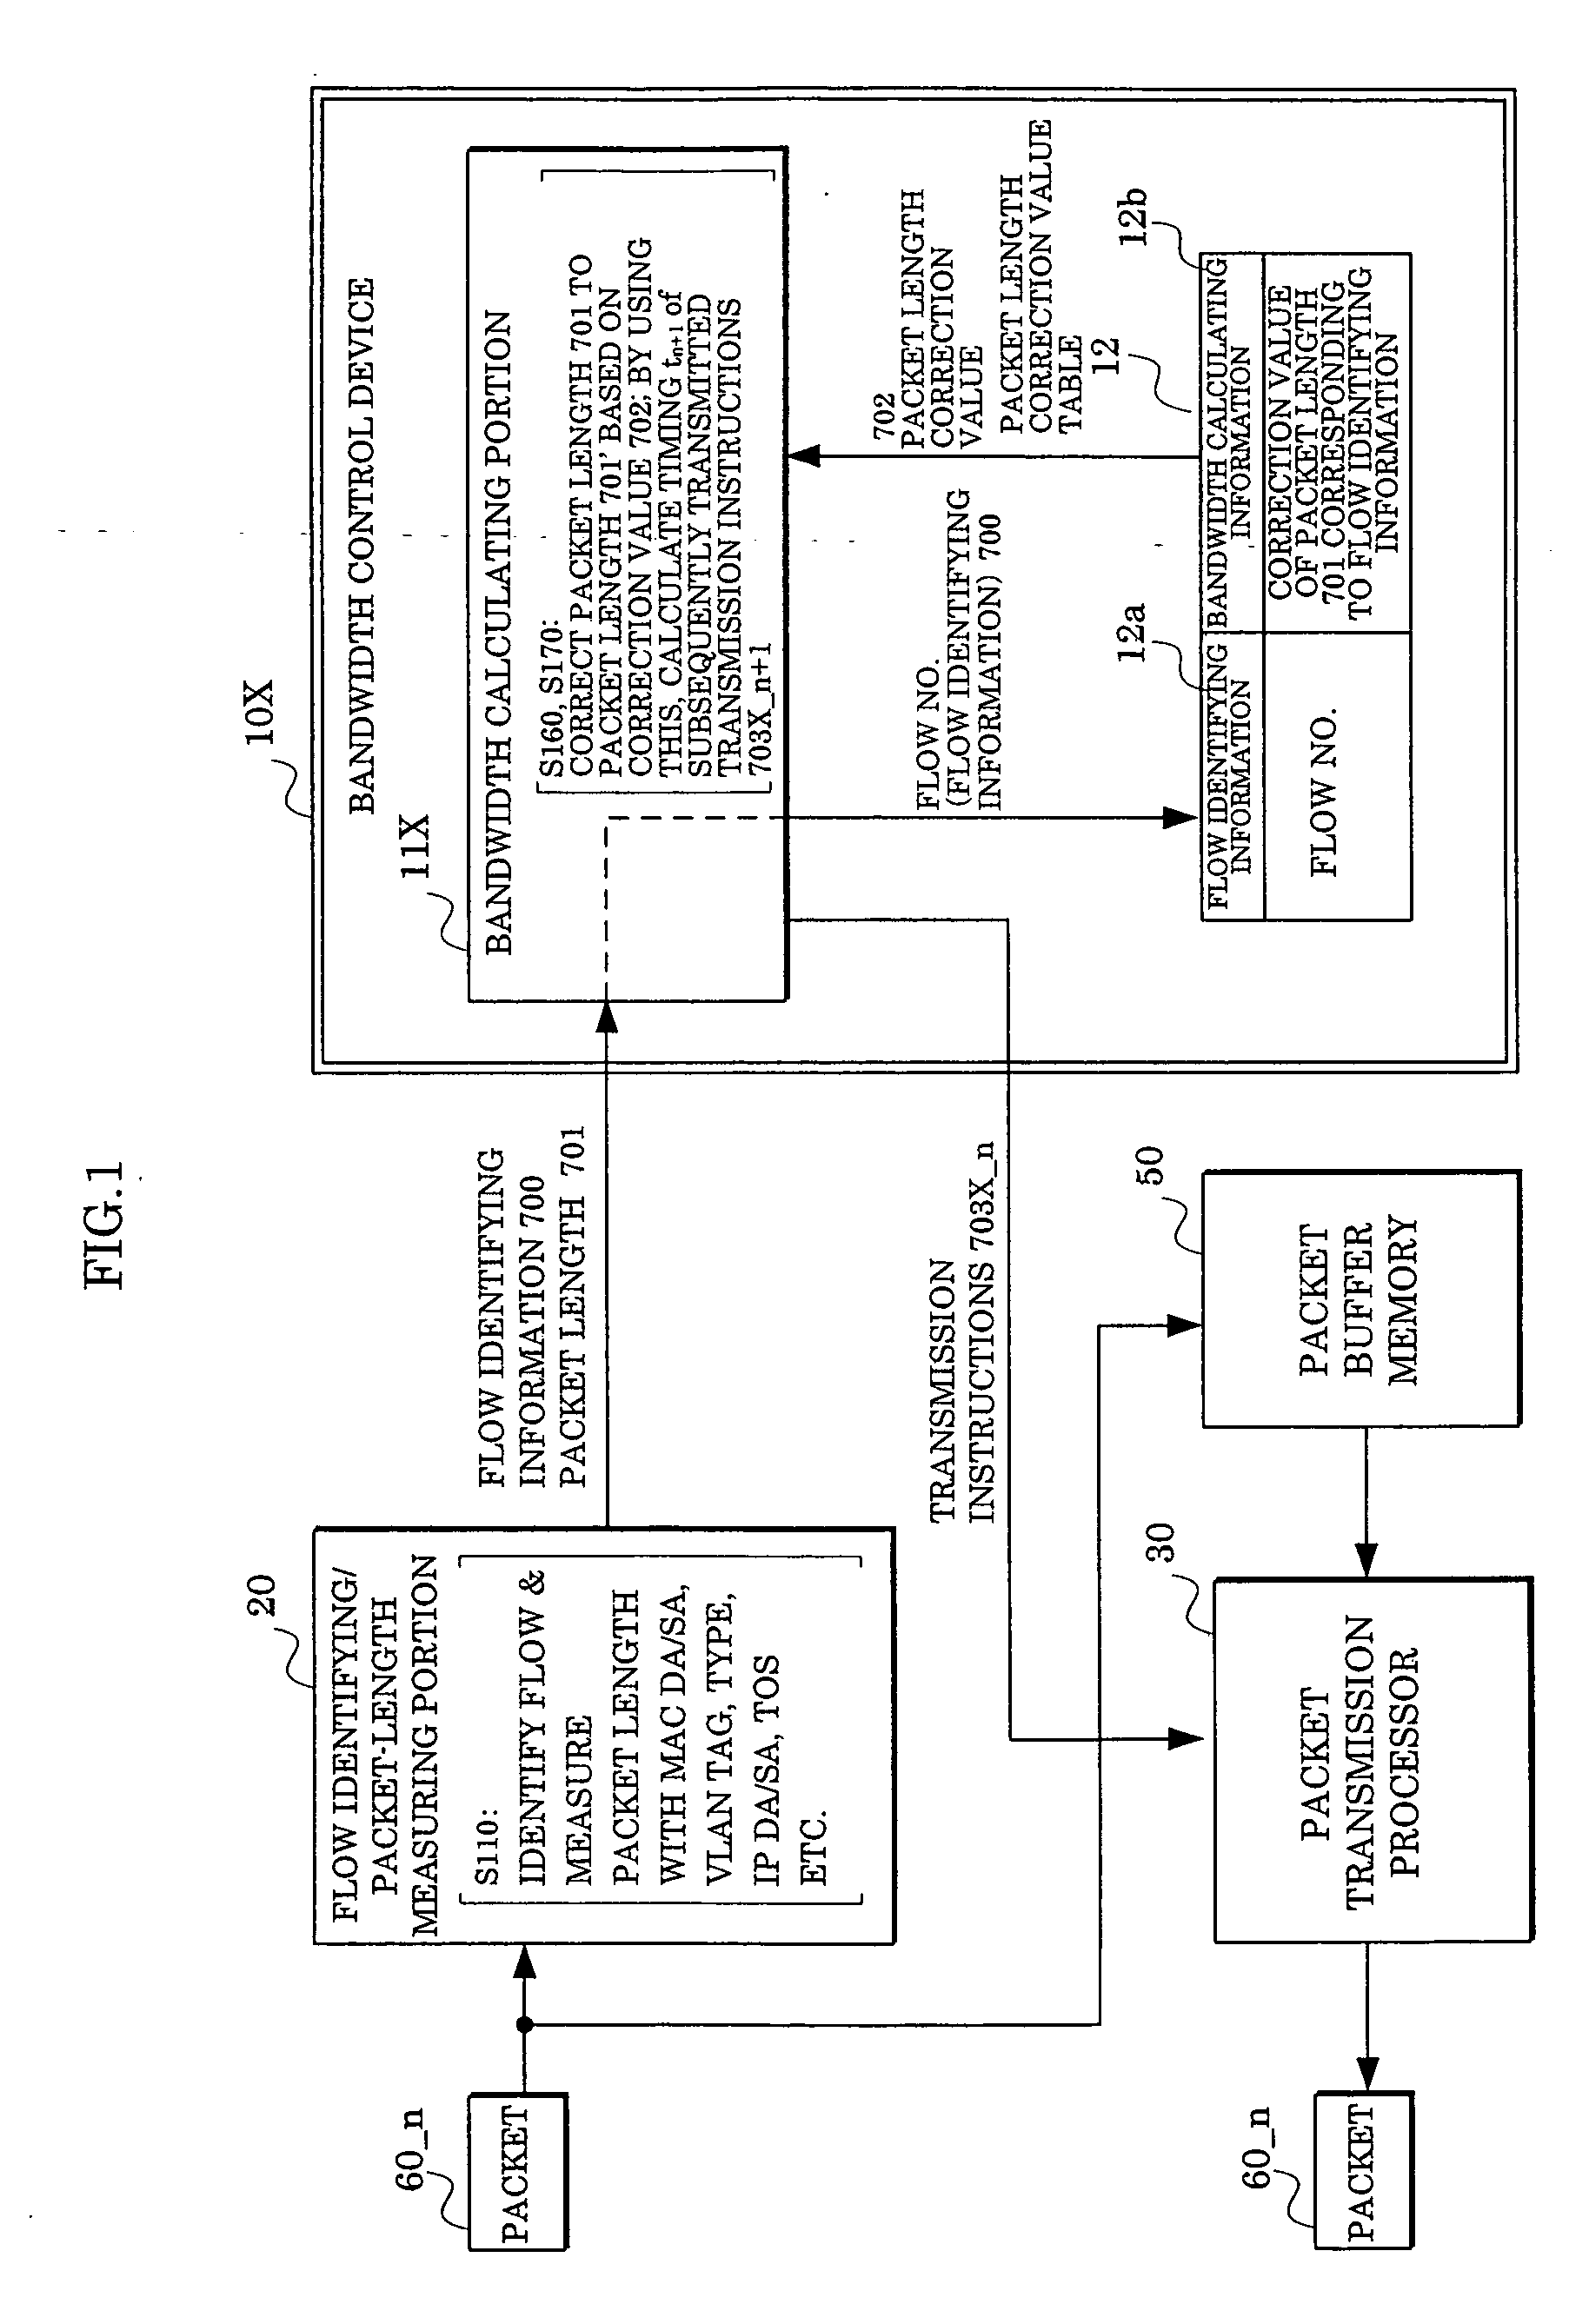 Bandwidth control device and method